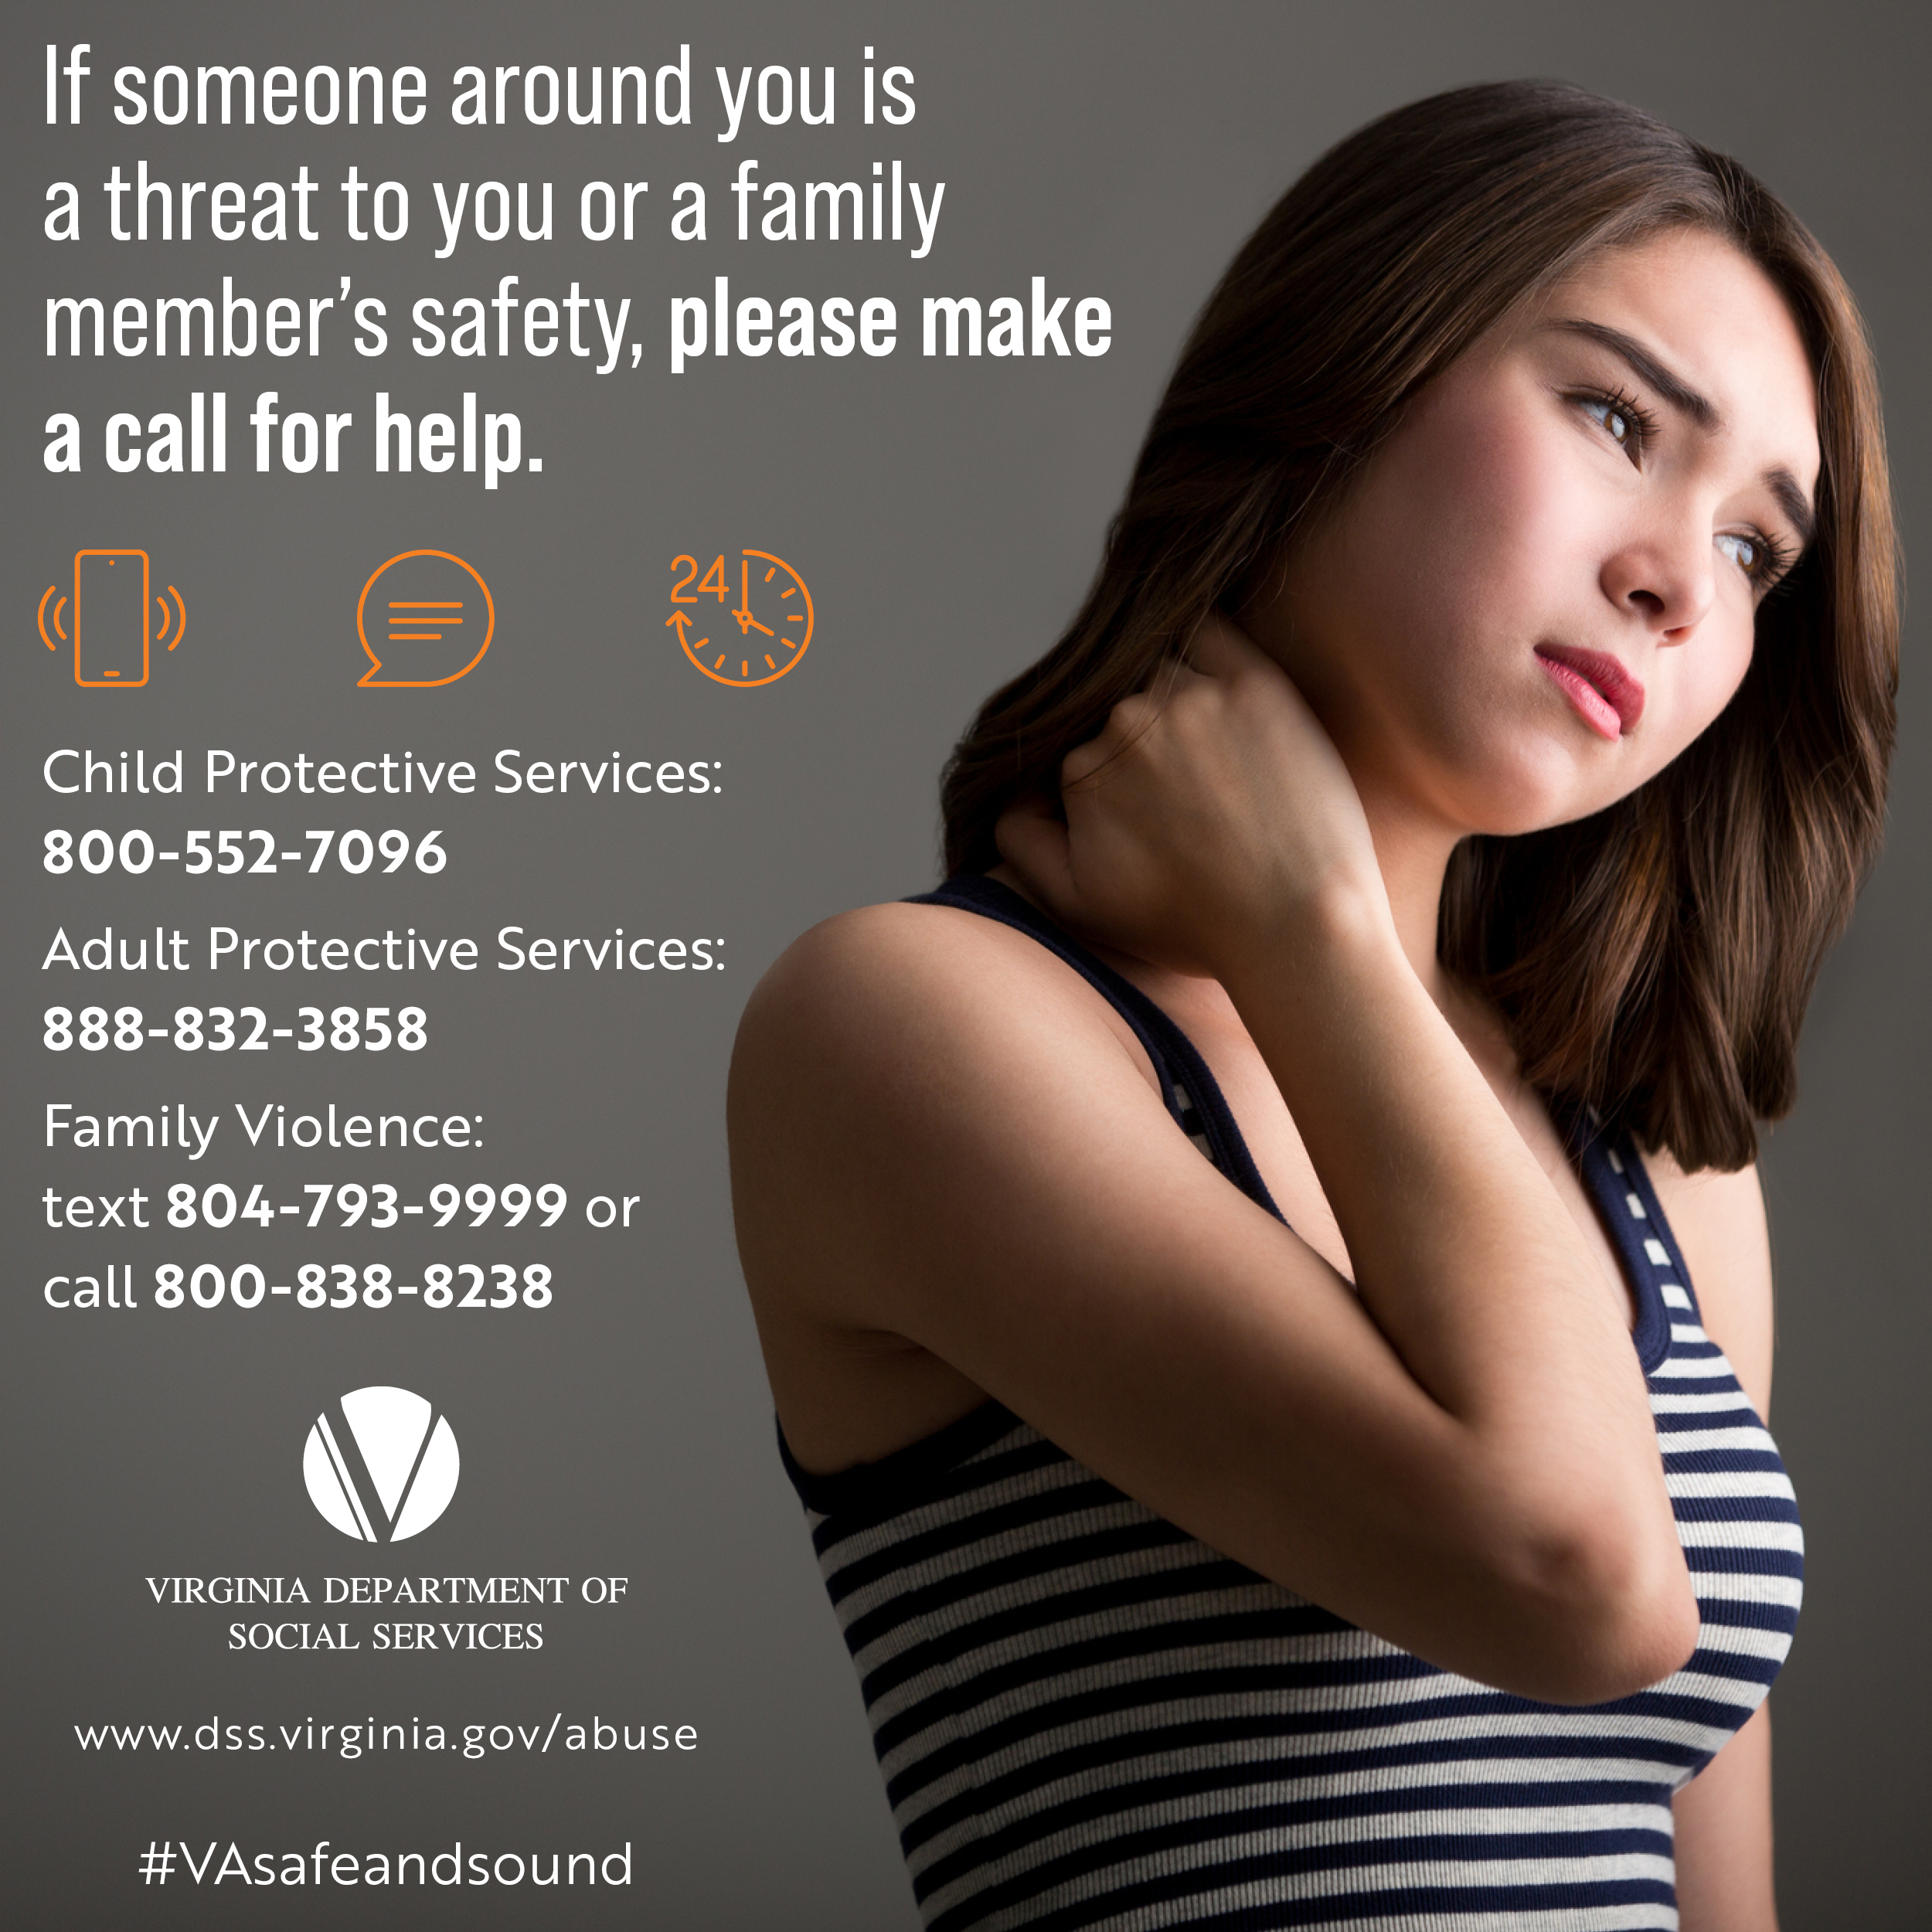 If someone around you is a threat to you or a family member’s safety, please make a call for help.